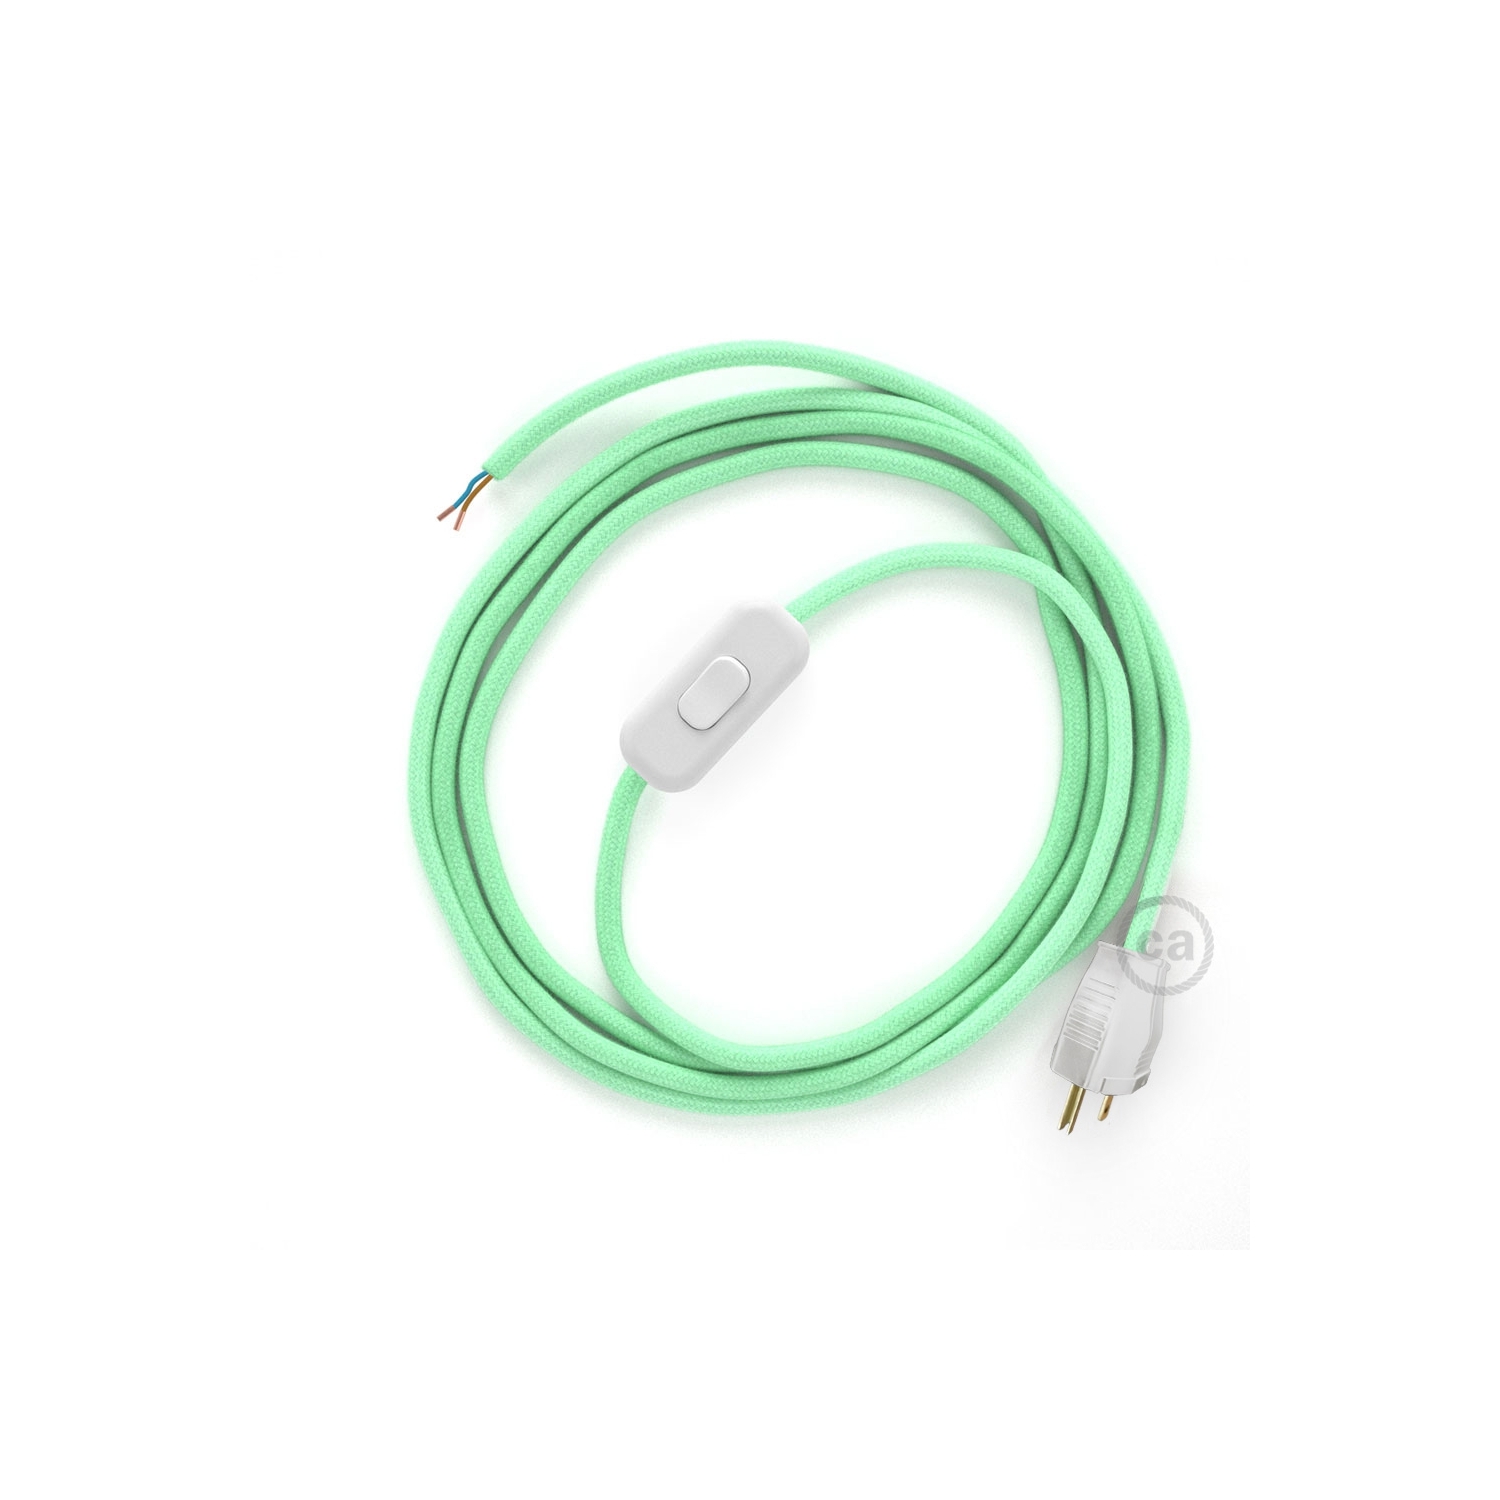 Power Cord with in-line switch, RC34 Mint Green Cotton - Choose color of switch/plug